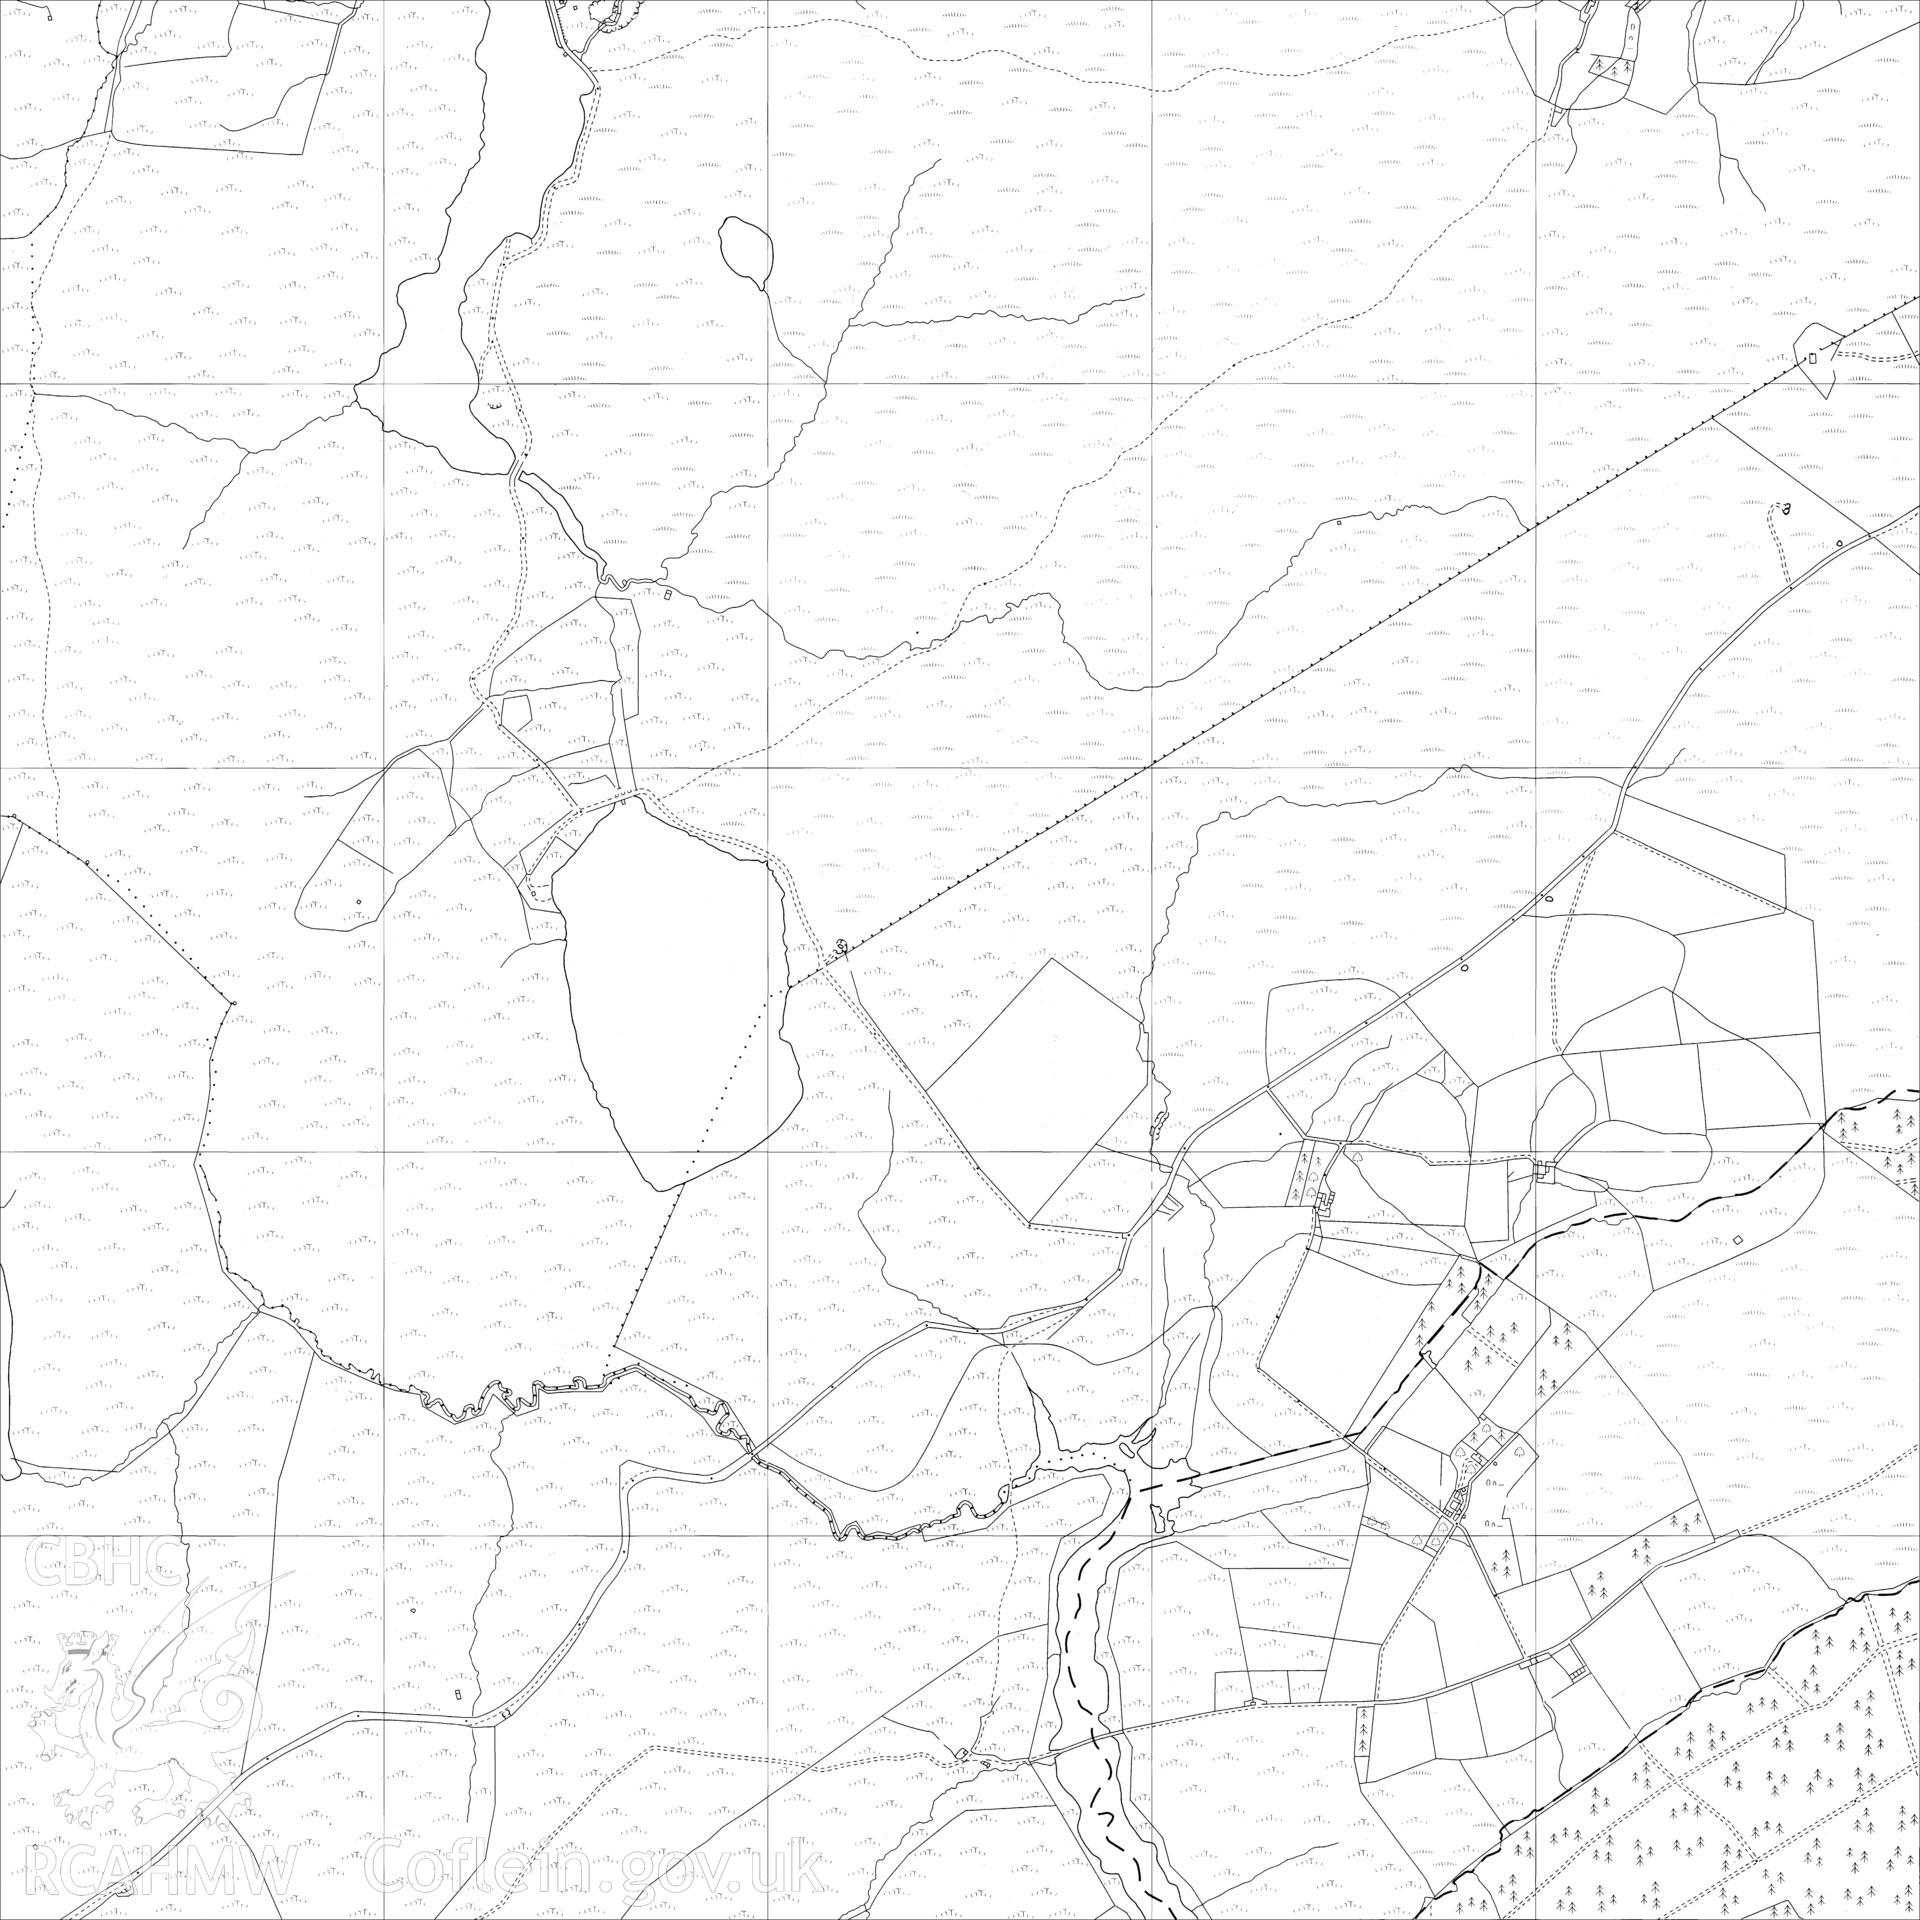 Digital copy of Ordnance Survey map extract showing the survey area. Map reference SH95NW.